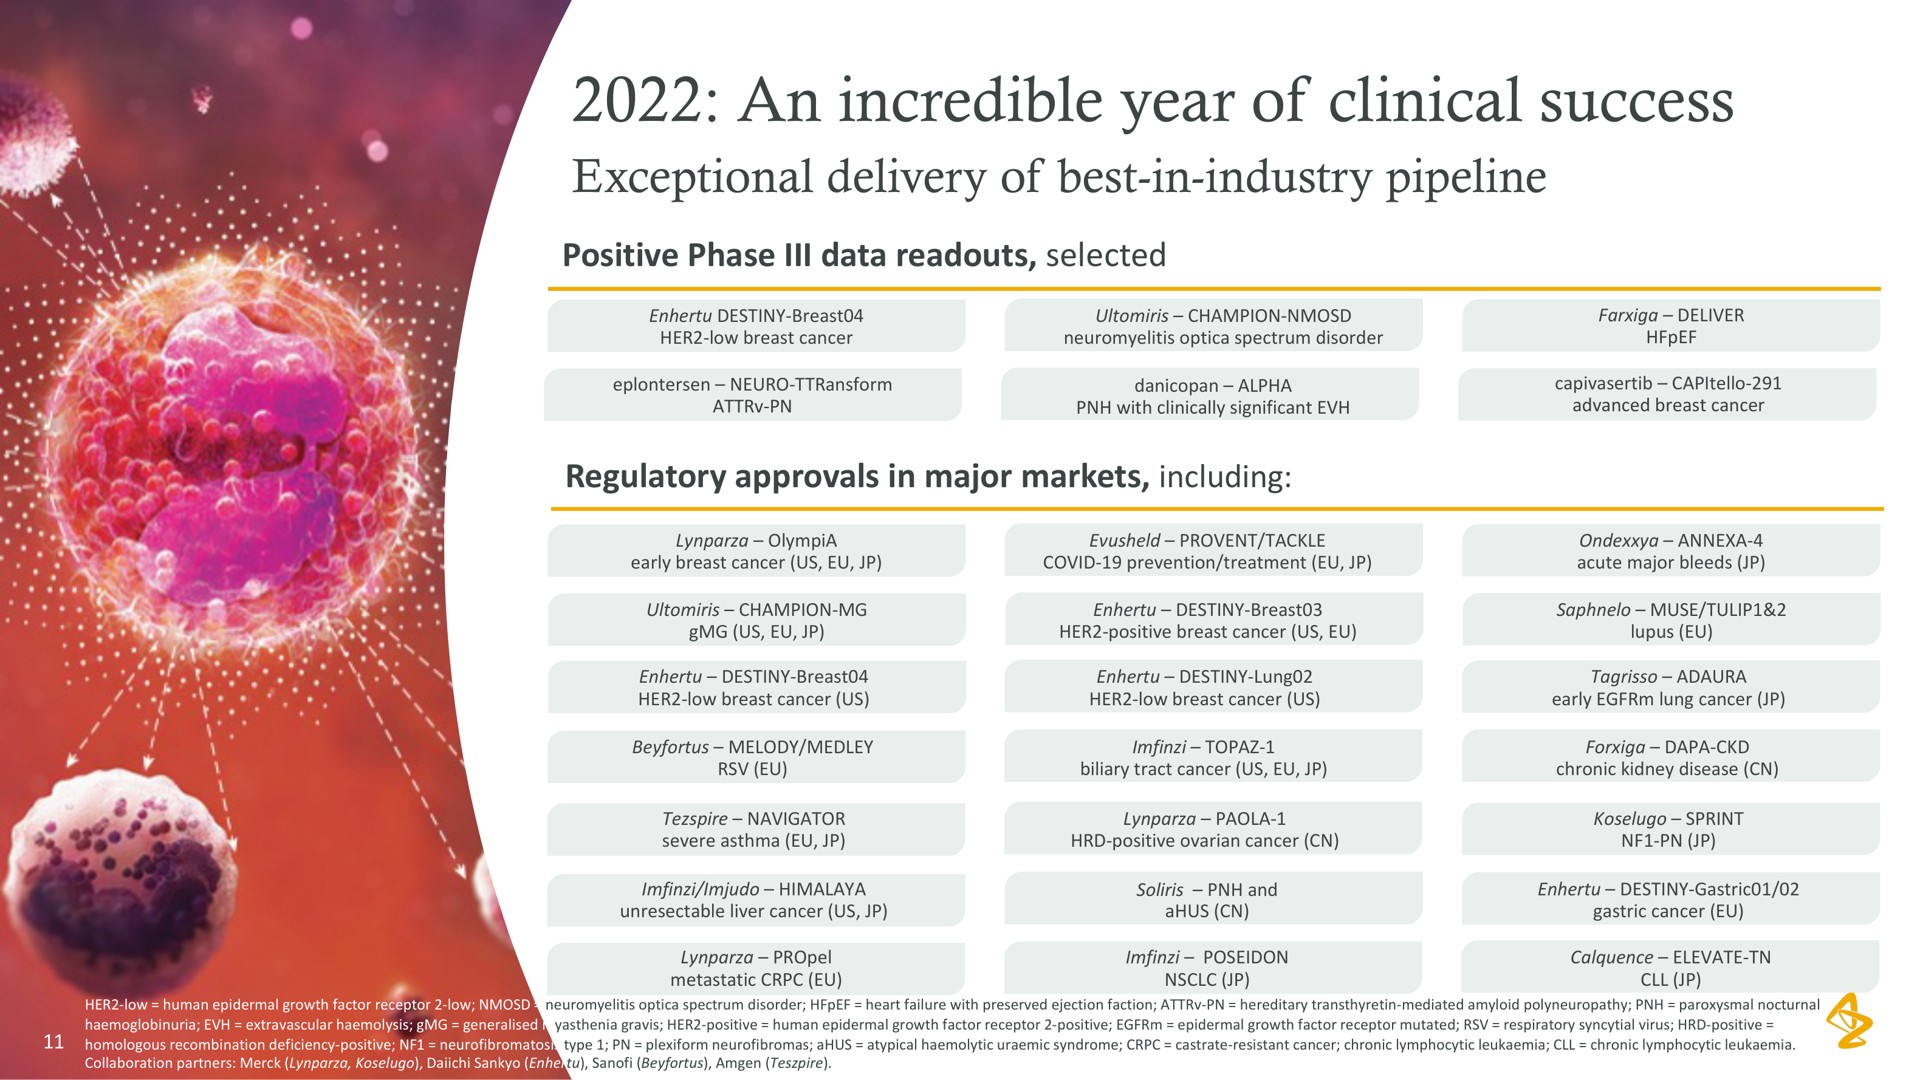 an incredible year of clinical success | AstraZeneca